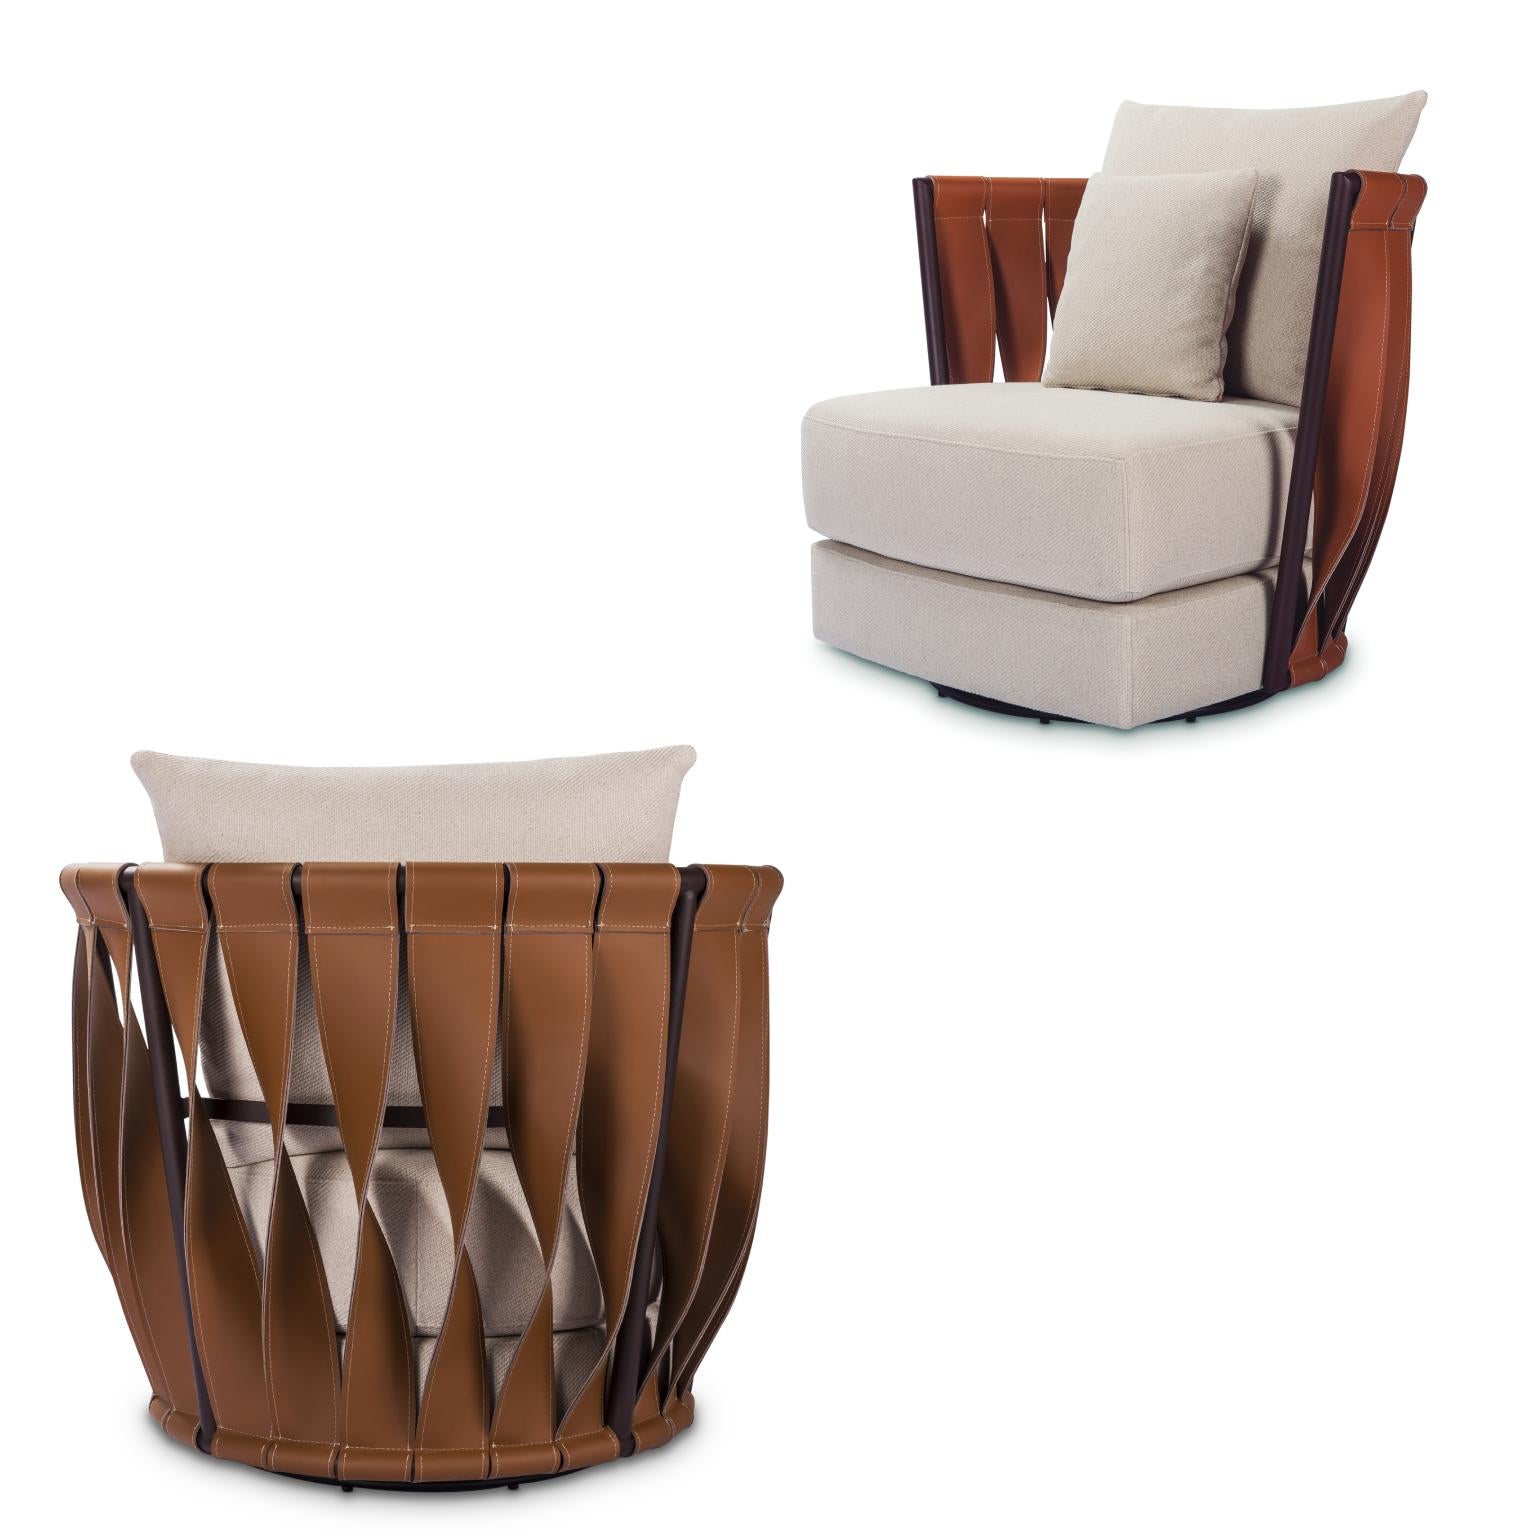 Swivel, Faux Leather Caramel and Fabric Cream Armchair Palla with Decor Cushions In New Condition For Sale In Miami, FL